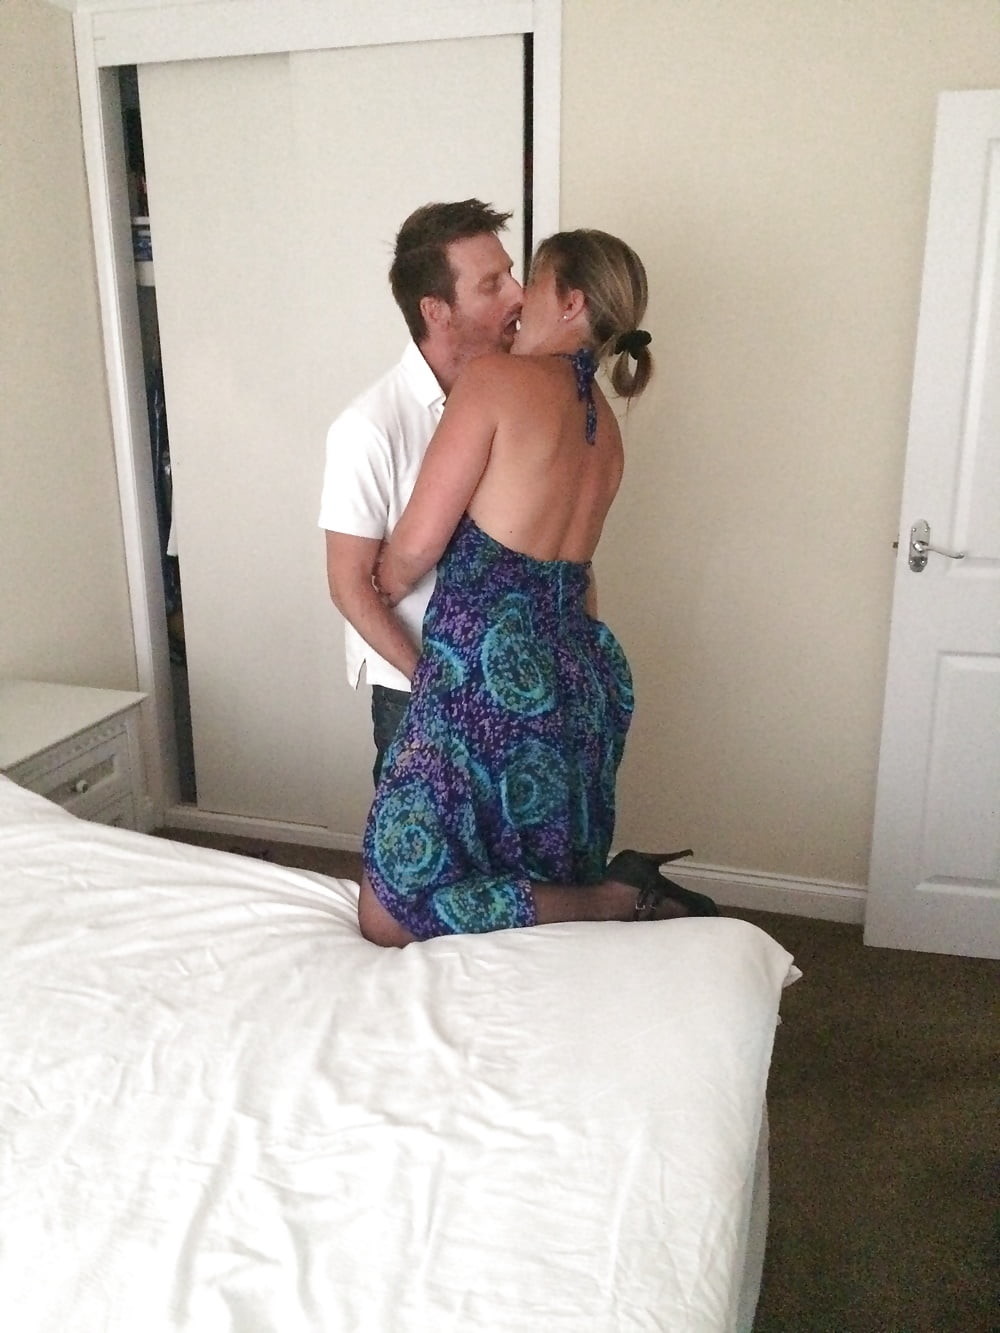 hotwife swinging kissing foreplay Porn Photos Hd